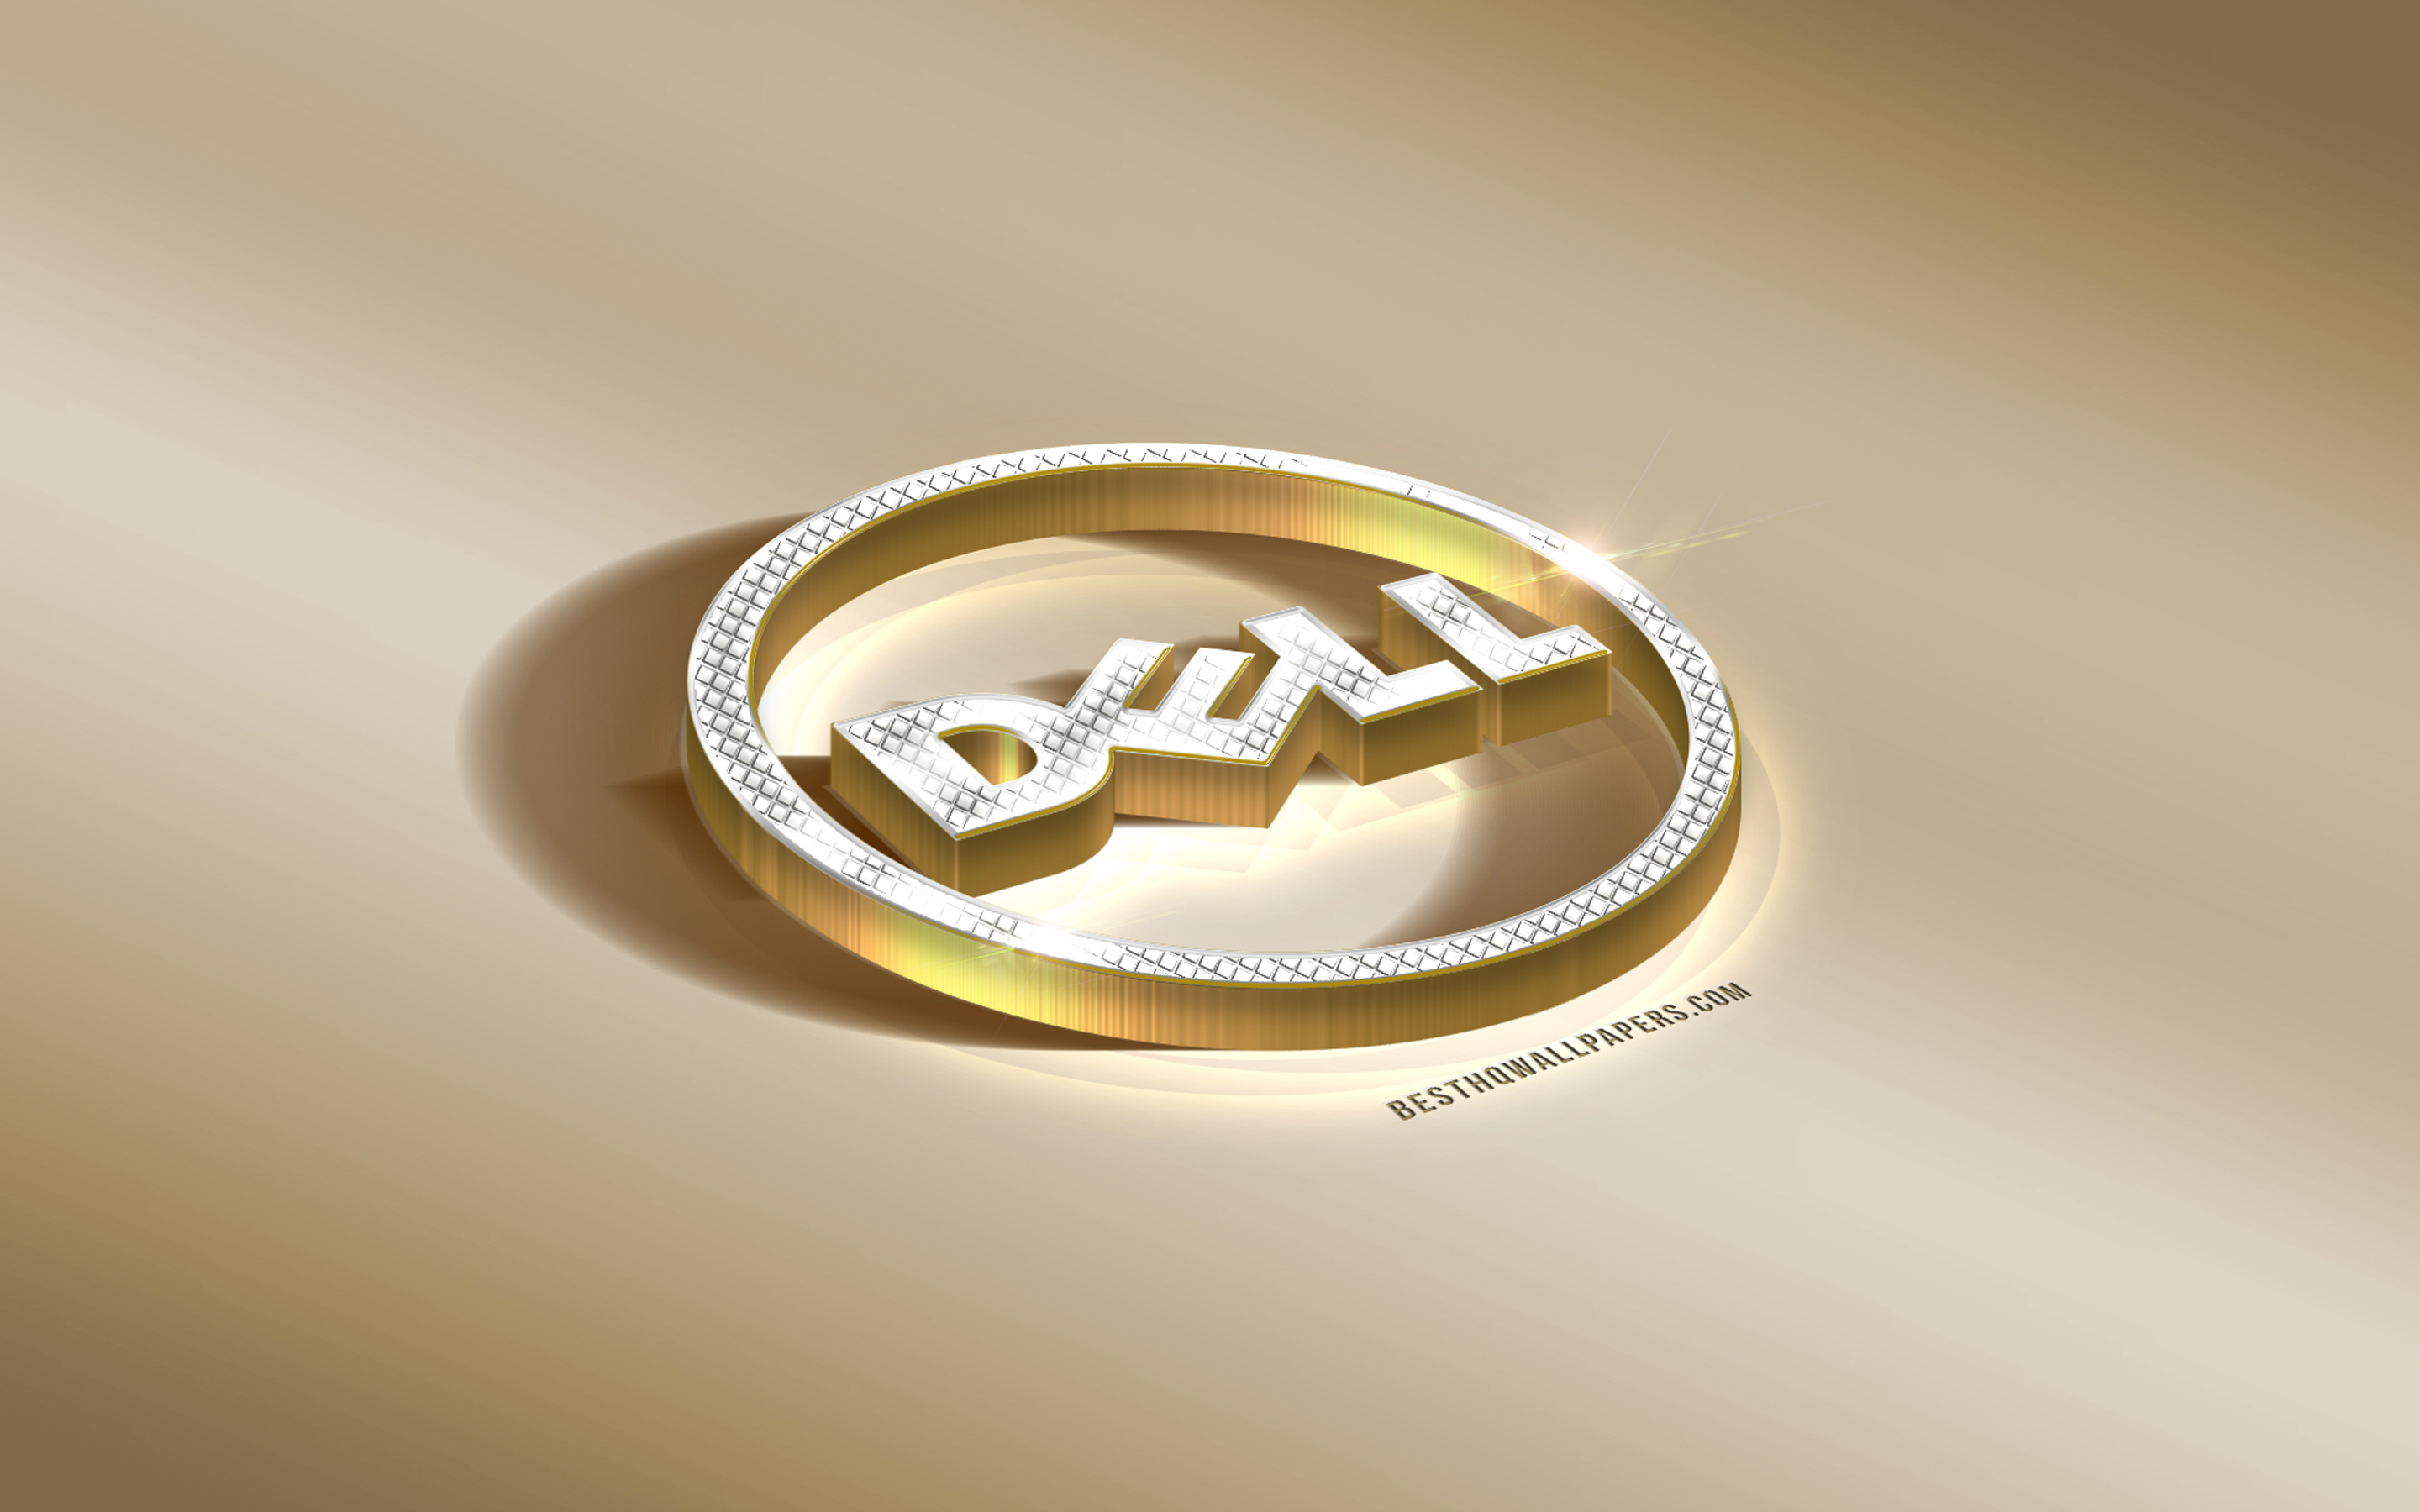 Download wallpaper Dell 3D logo, gold background, Dell diamonds logo, Dell round logo, Dell, creative art, Dell emblem for desktop with resolution 2880x1800. High Quality HD picture wallpaper